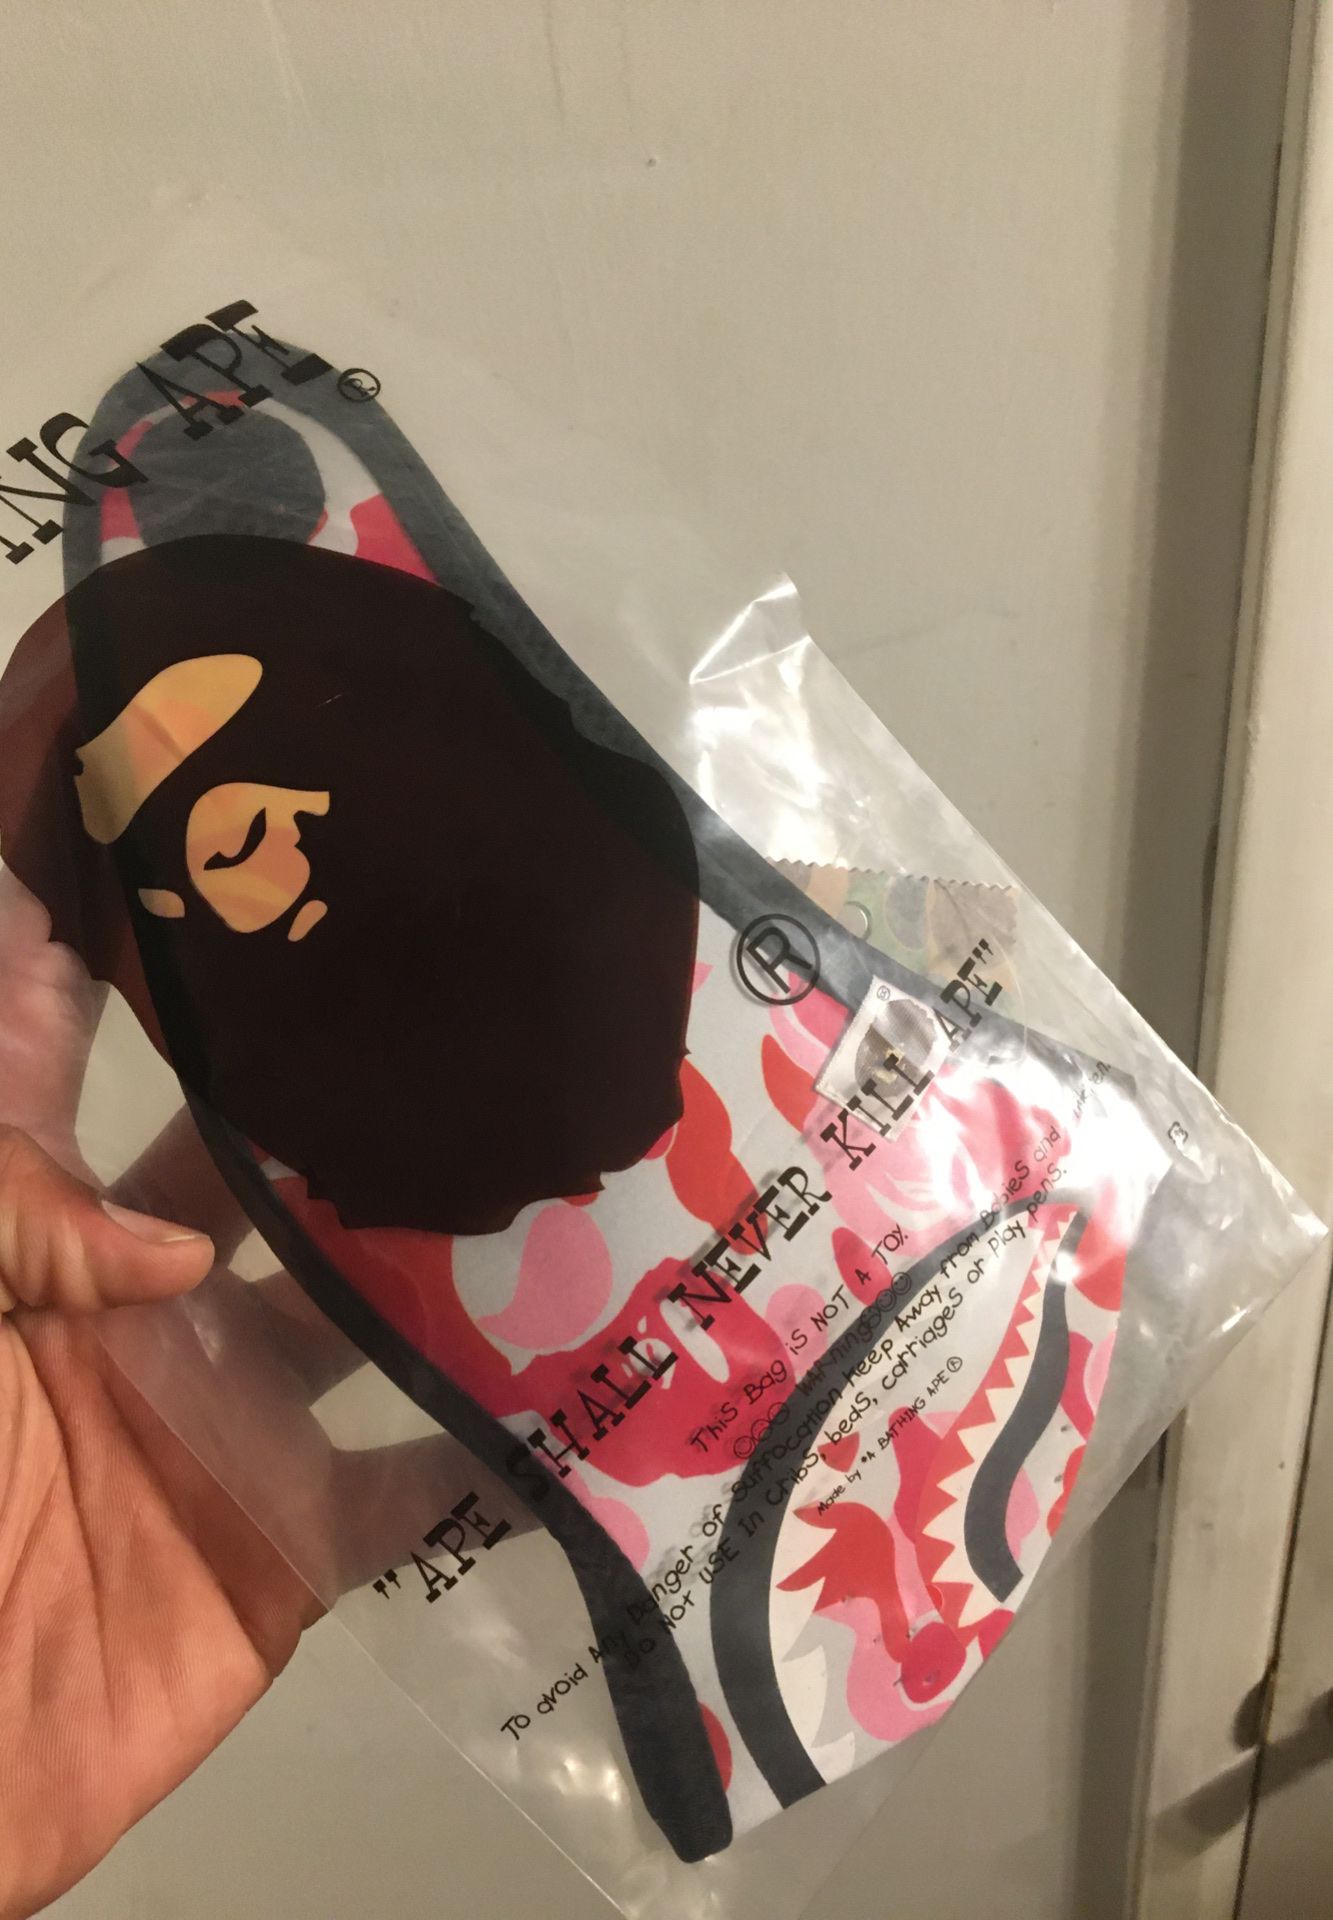 Authentic stock X certified✅ BAPE mask 😷